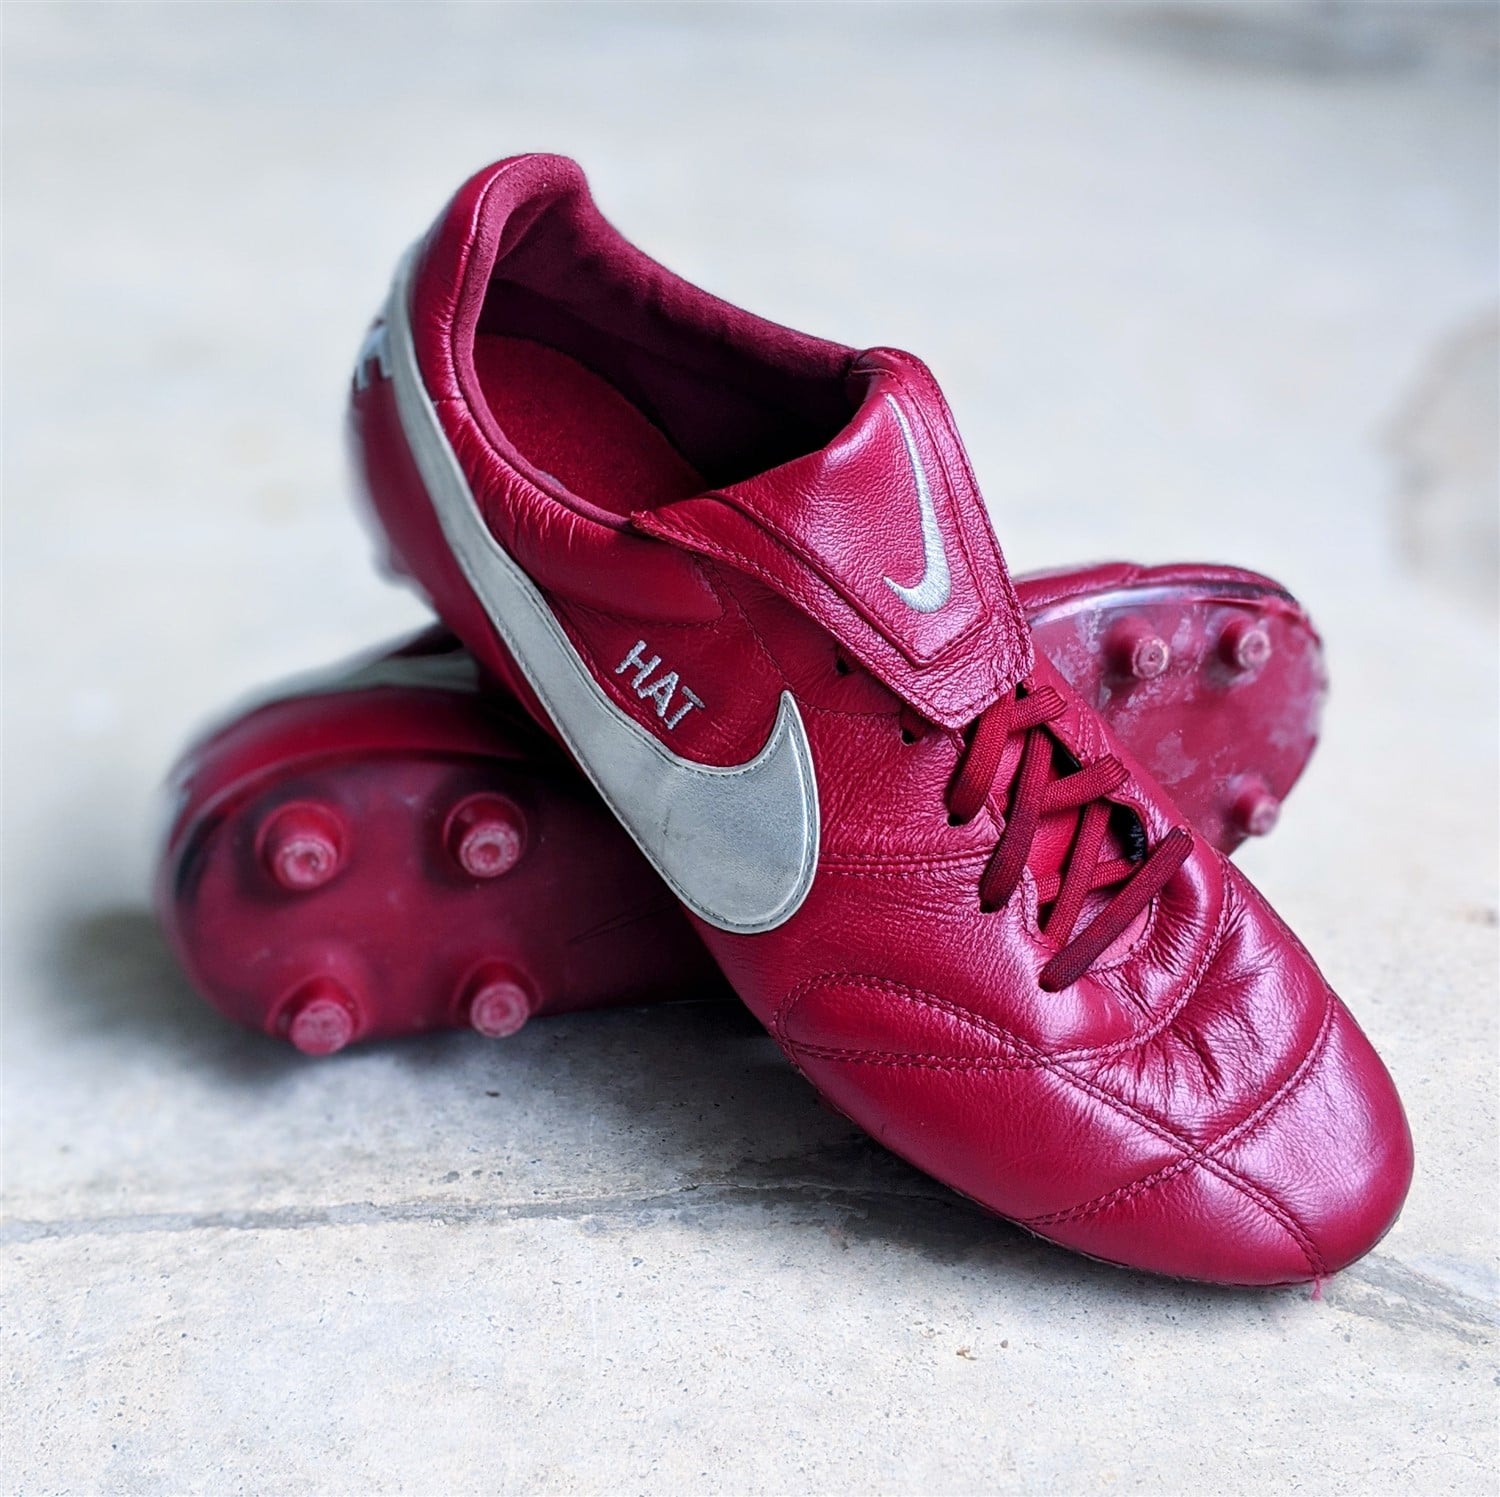 Nike Premier 2.0 football boots soccer cleats review